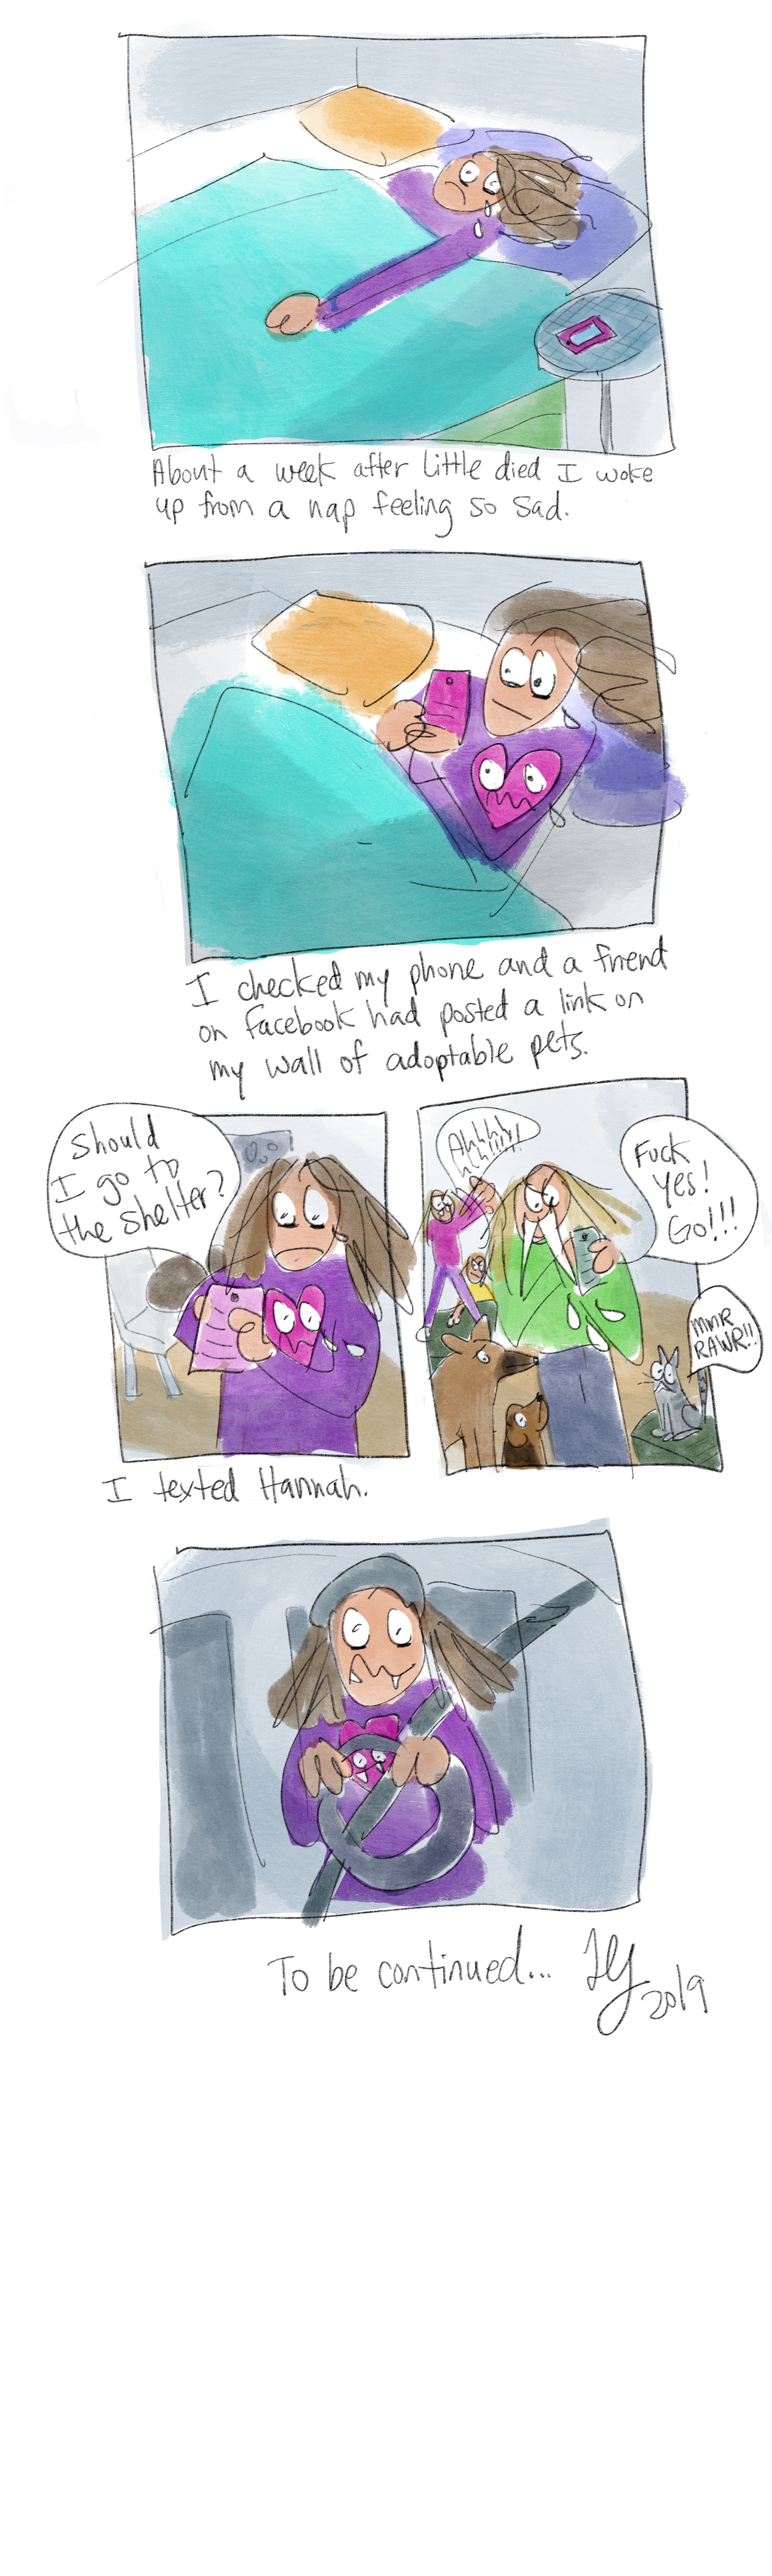 This is a comic about how I decided to adopt a new dog. I was so sad when my dog died. I could not stand being in my apartment. It was so quiet. I finally decided I did not want to live without a dog, and so I went to the shelter!